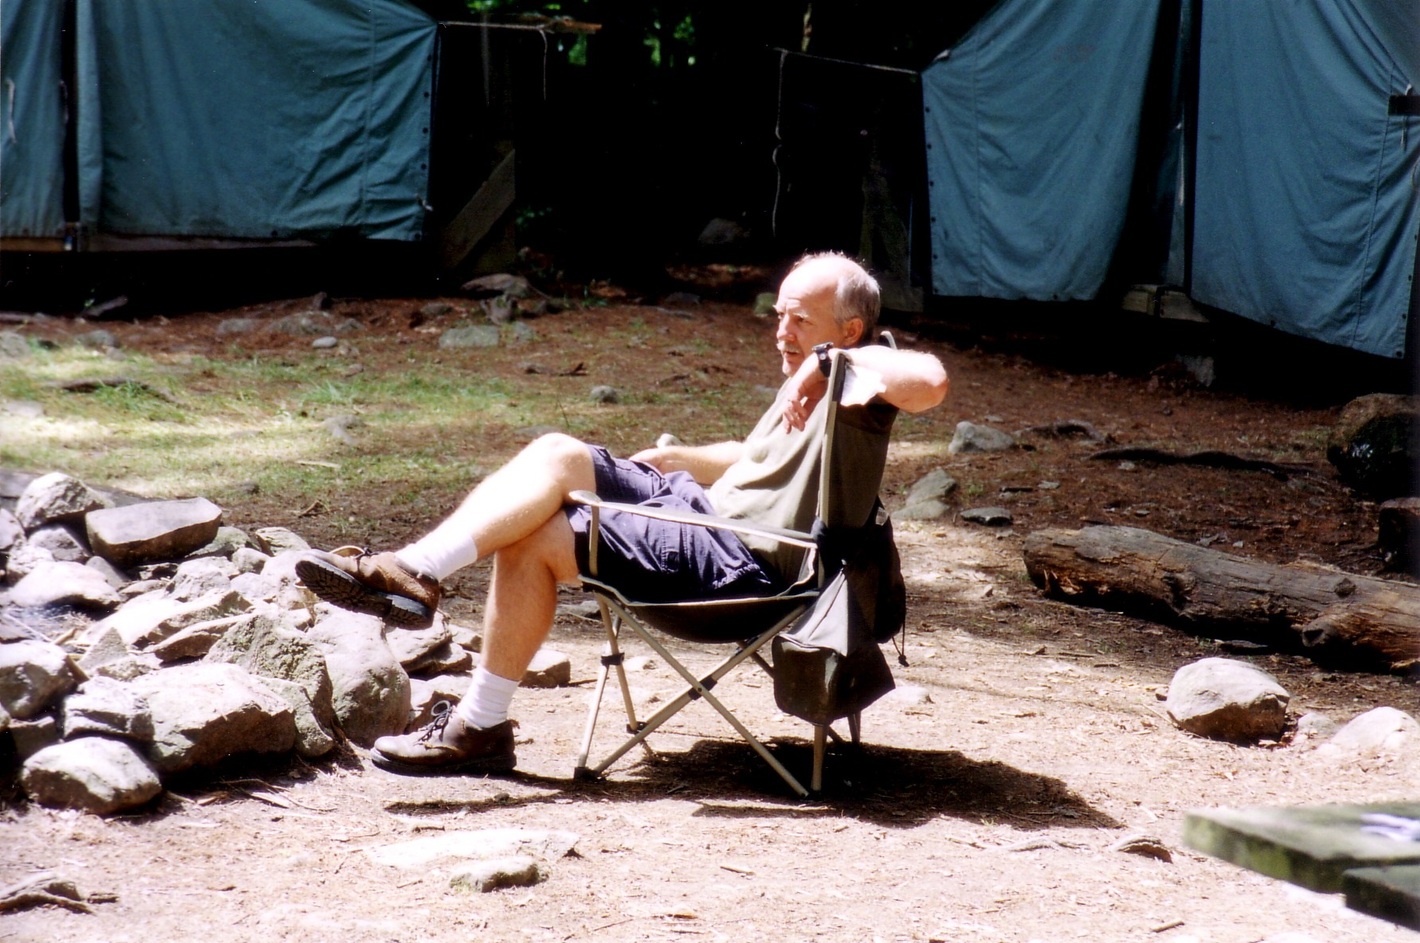 A man sitting in a camping chair in the sunlight.  Behind are two cabin tents.